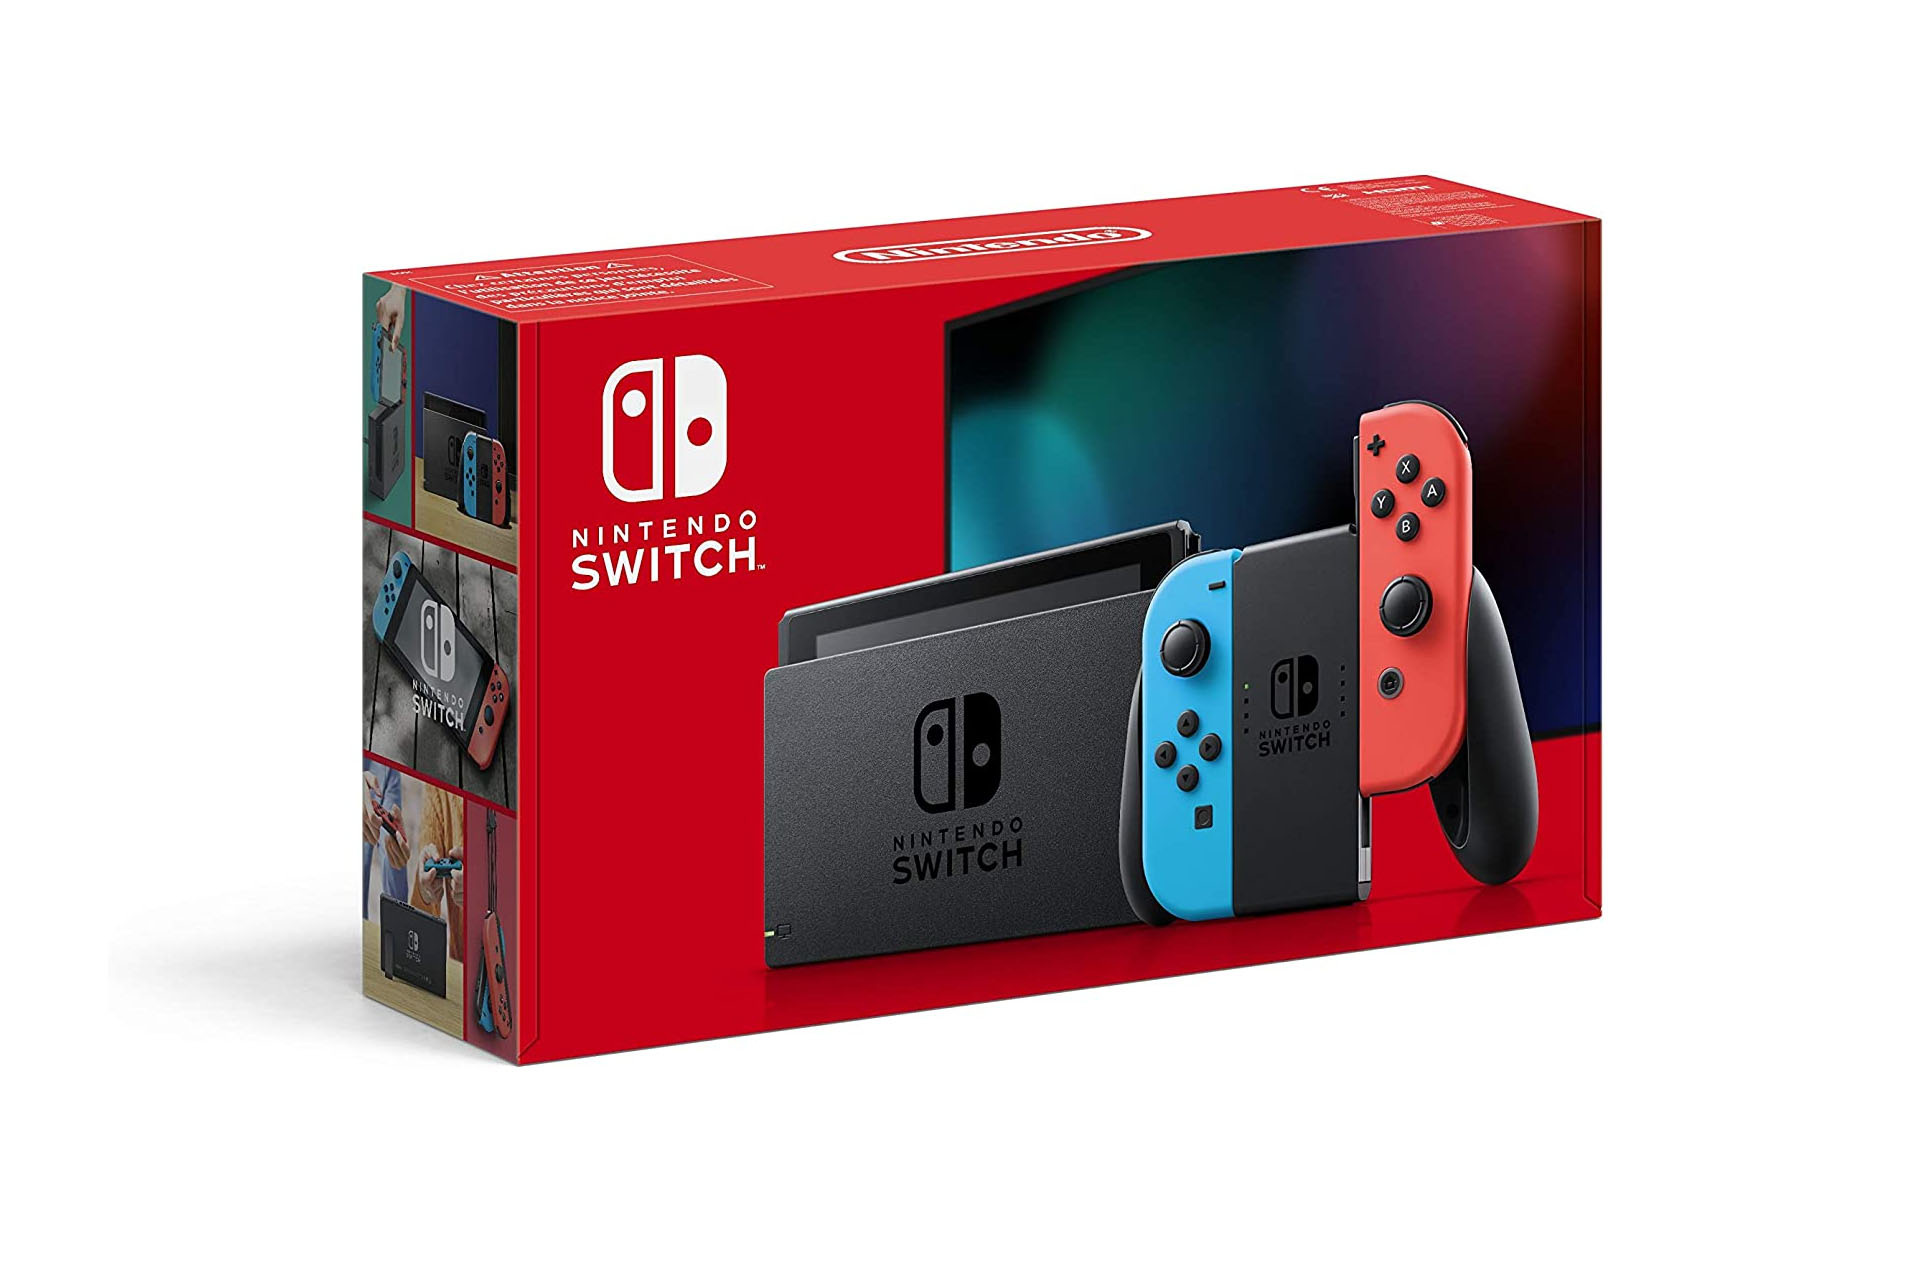 A product shot of the Nintendo Switch console on a white background